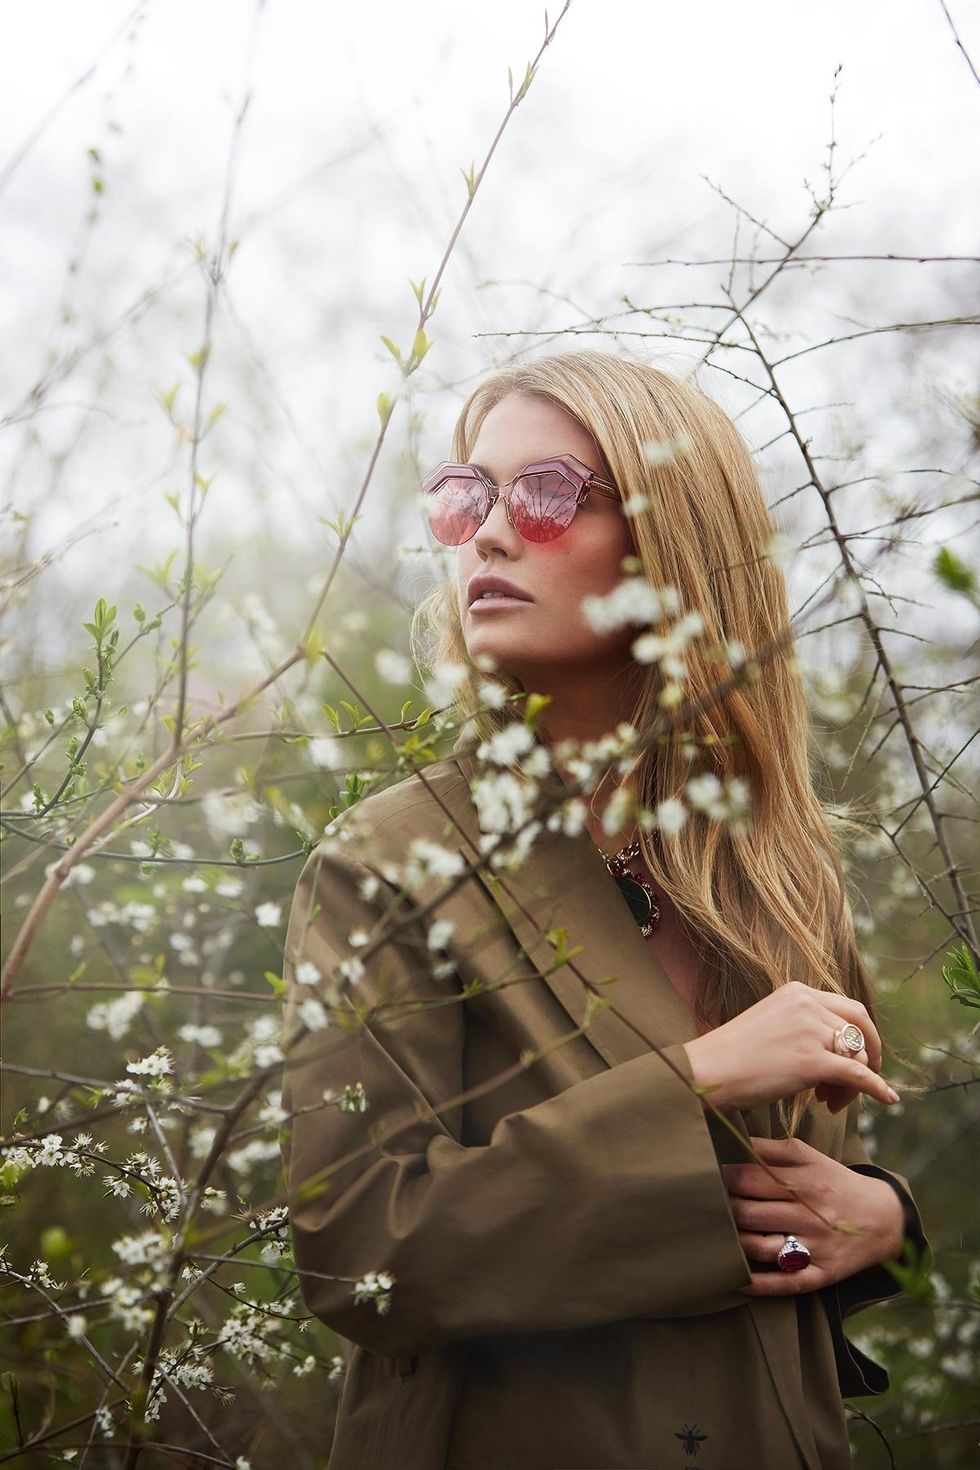 People in nature, Photograph, Eyewear, Beauty, Blond, Glasses, Tree, Fashion, Spring, Branch, 